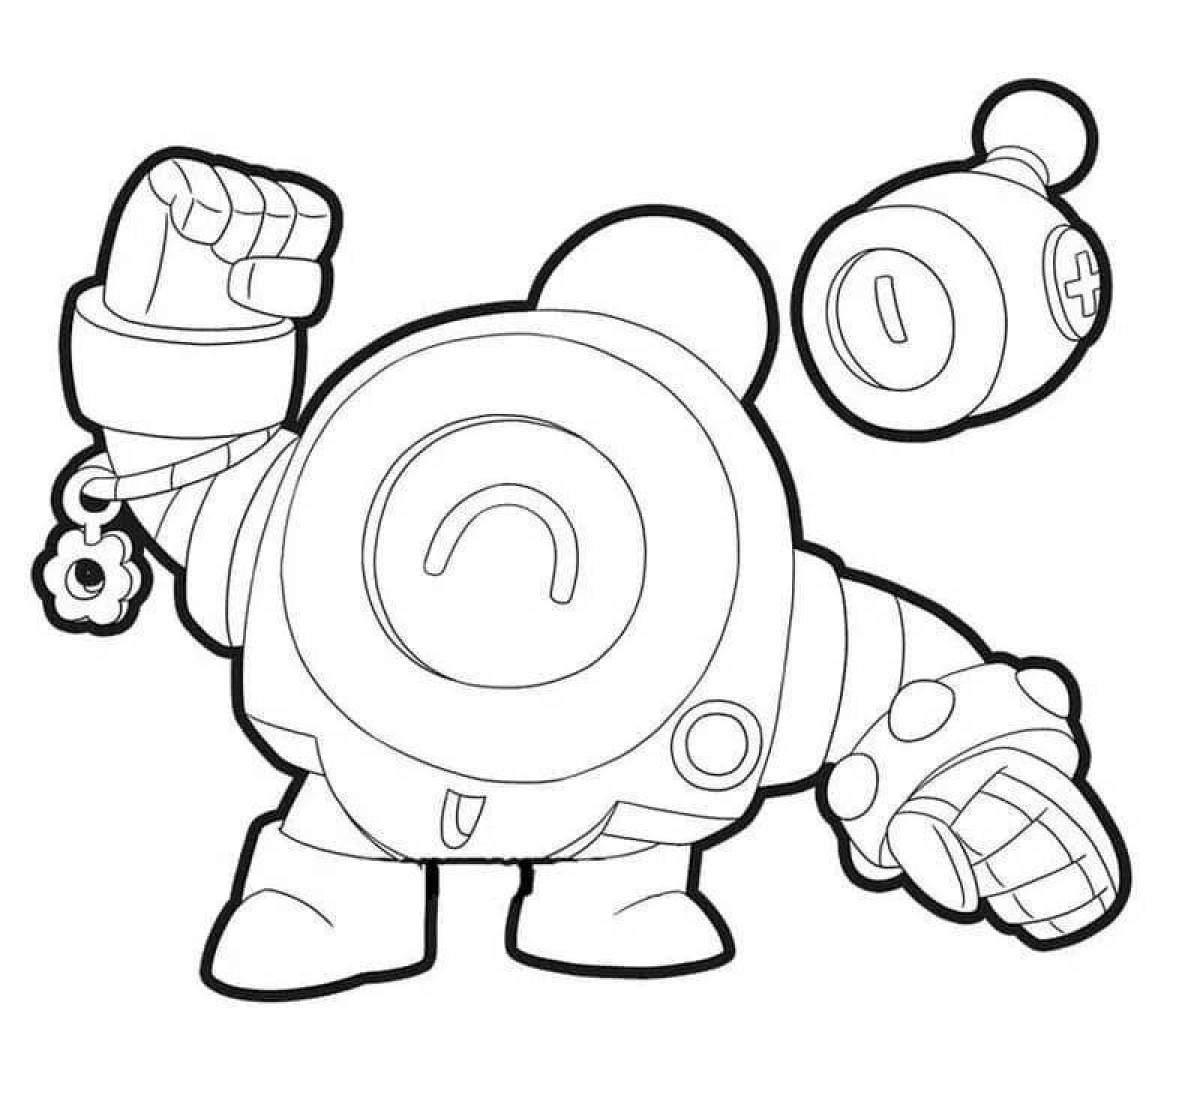 Marvelous bravo stars coloring pages for kids